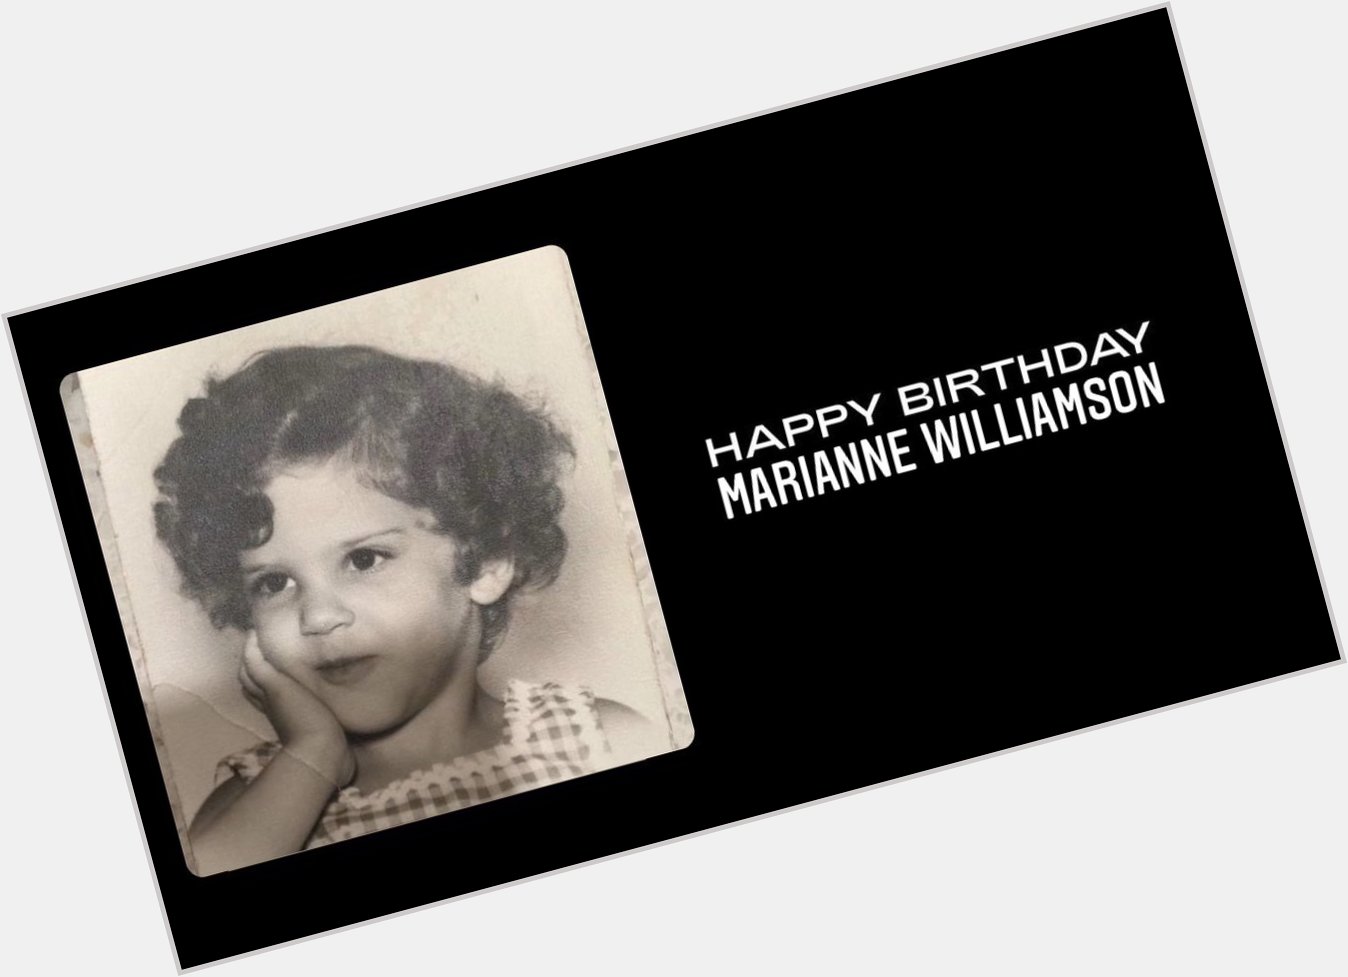 Beyonce wishes Marianne Williamson a happy birthday 